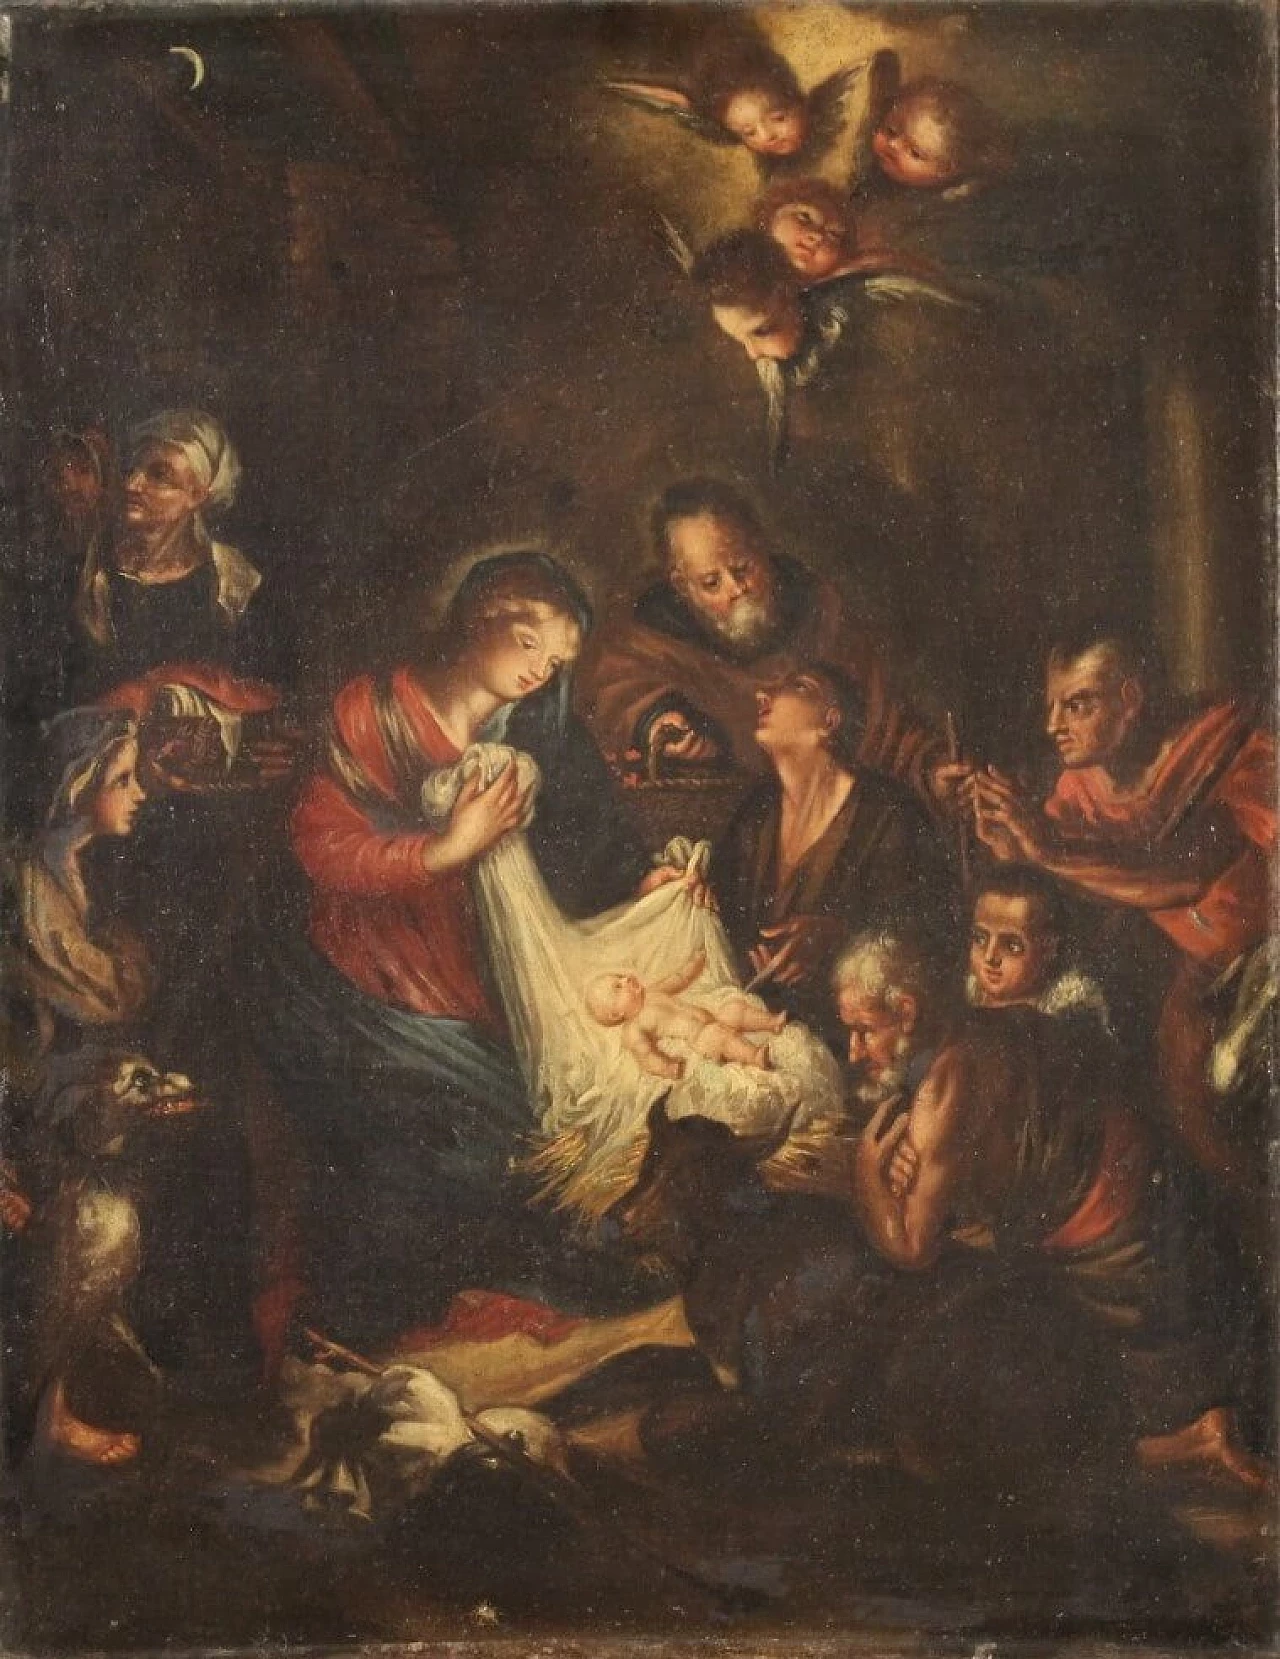 Oil on canvas Adoration of the Shepherds, 17th century 13